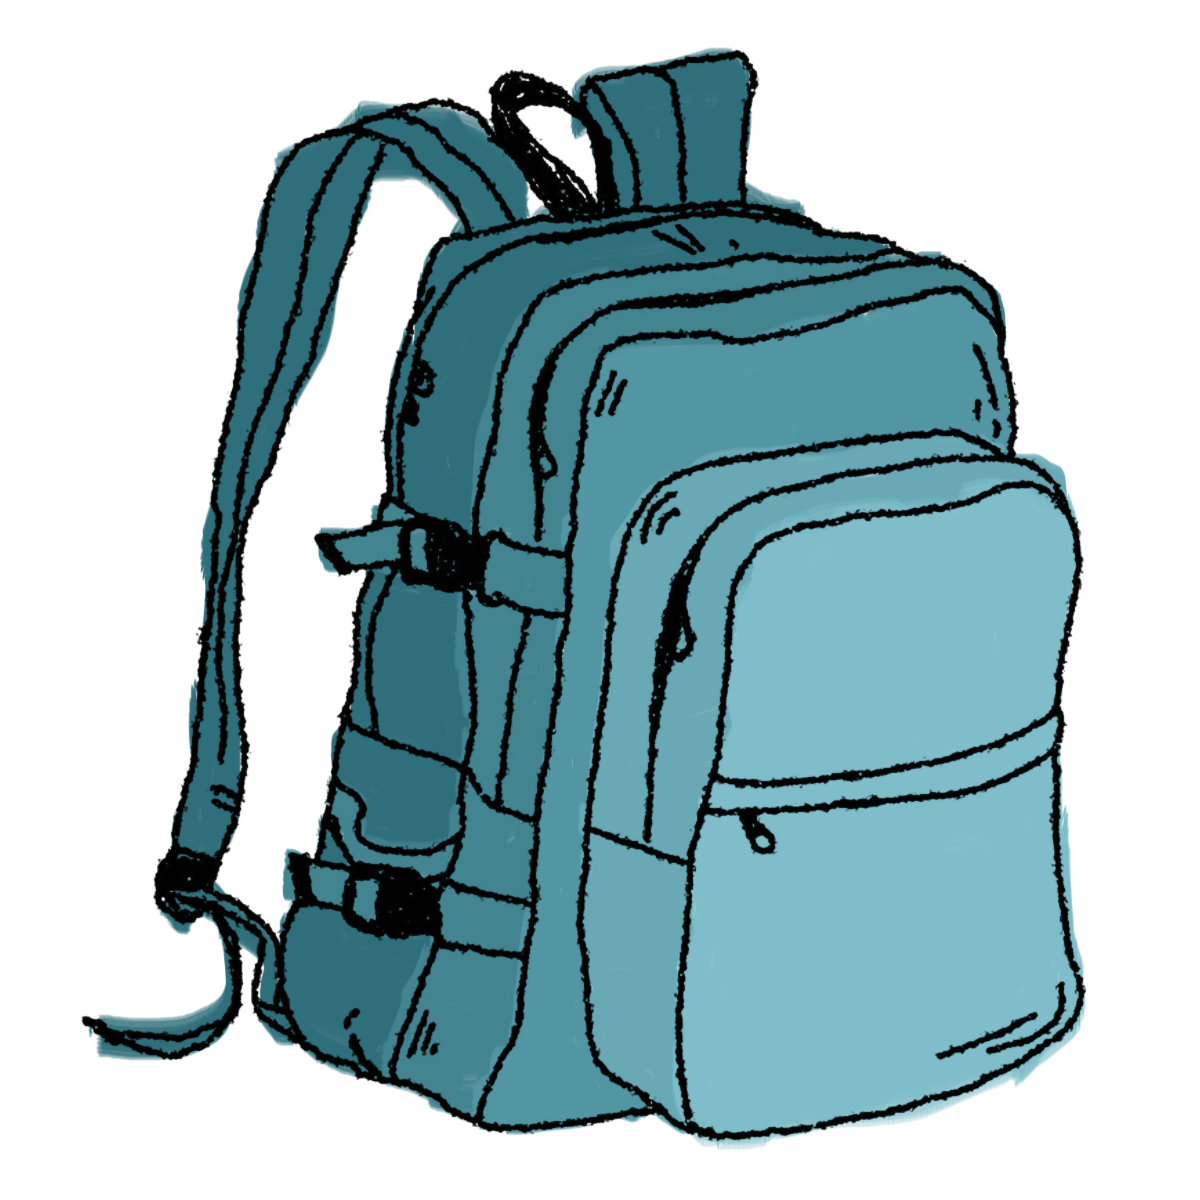 Outline icon - school bag. School bag icon in thin outline style. backpack  luggage rucksack student zipper. | CanStock